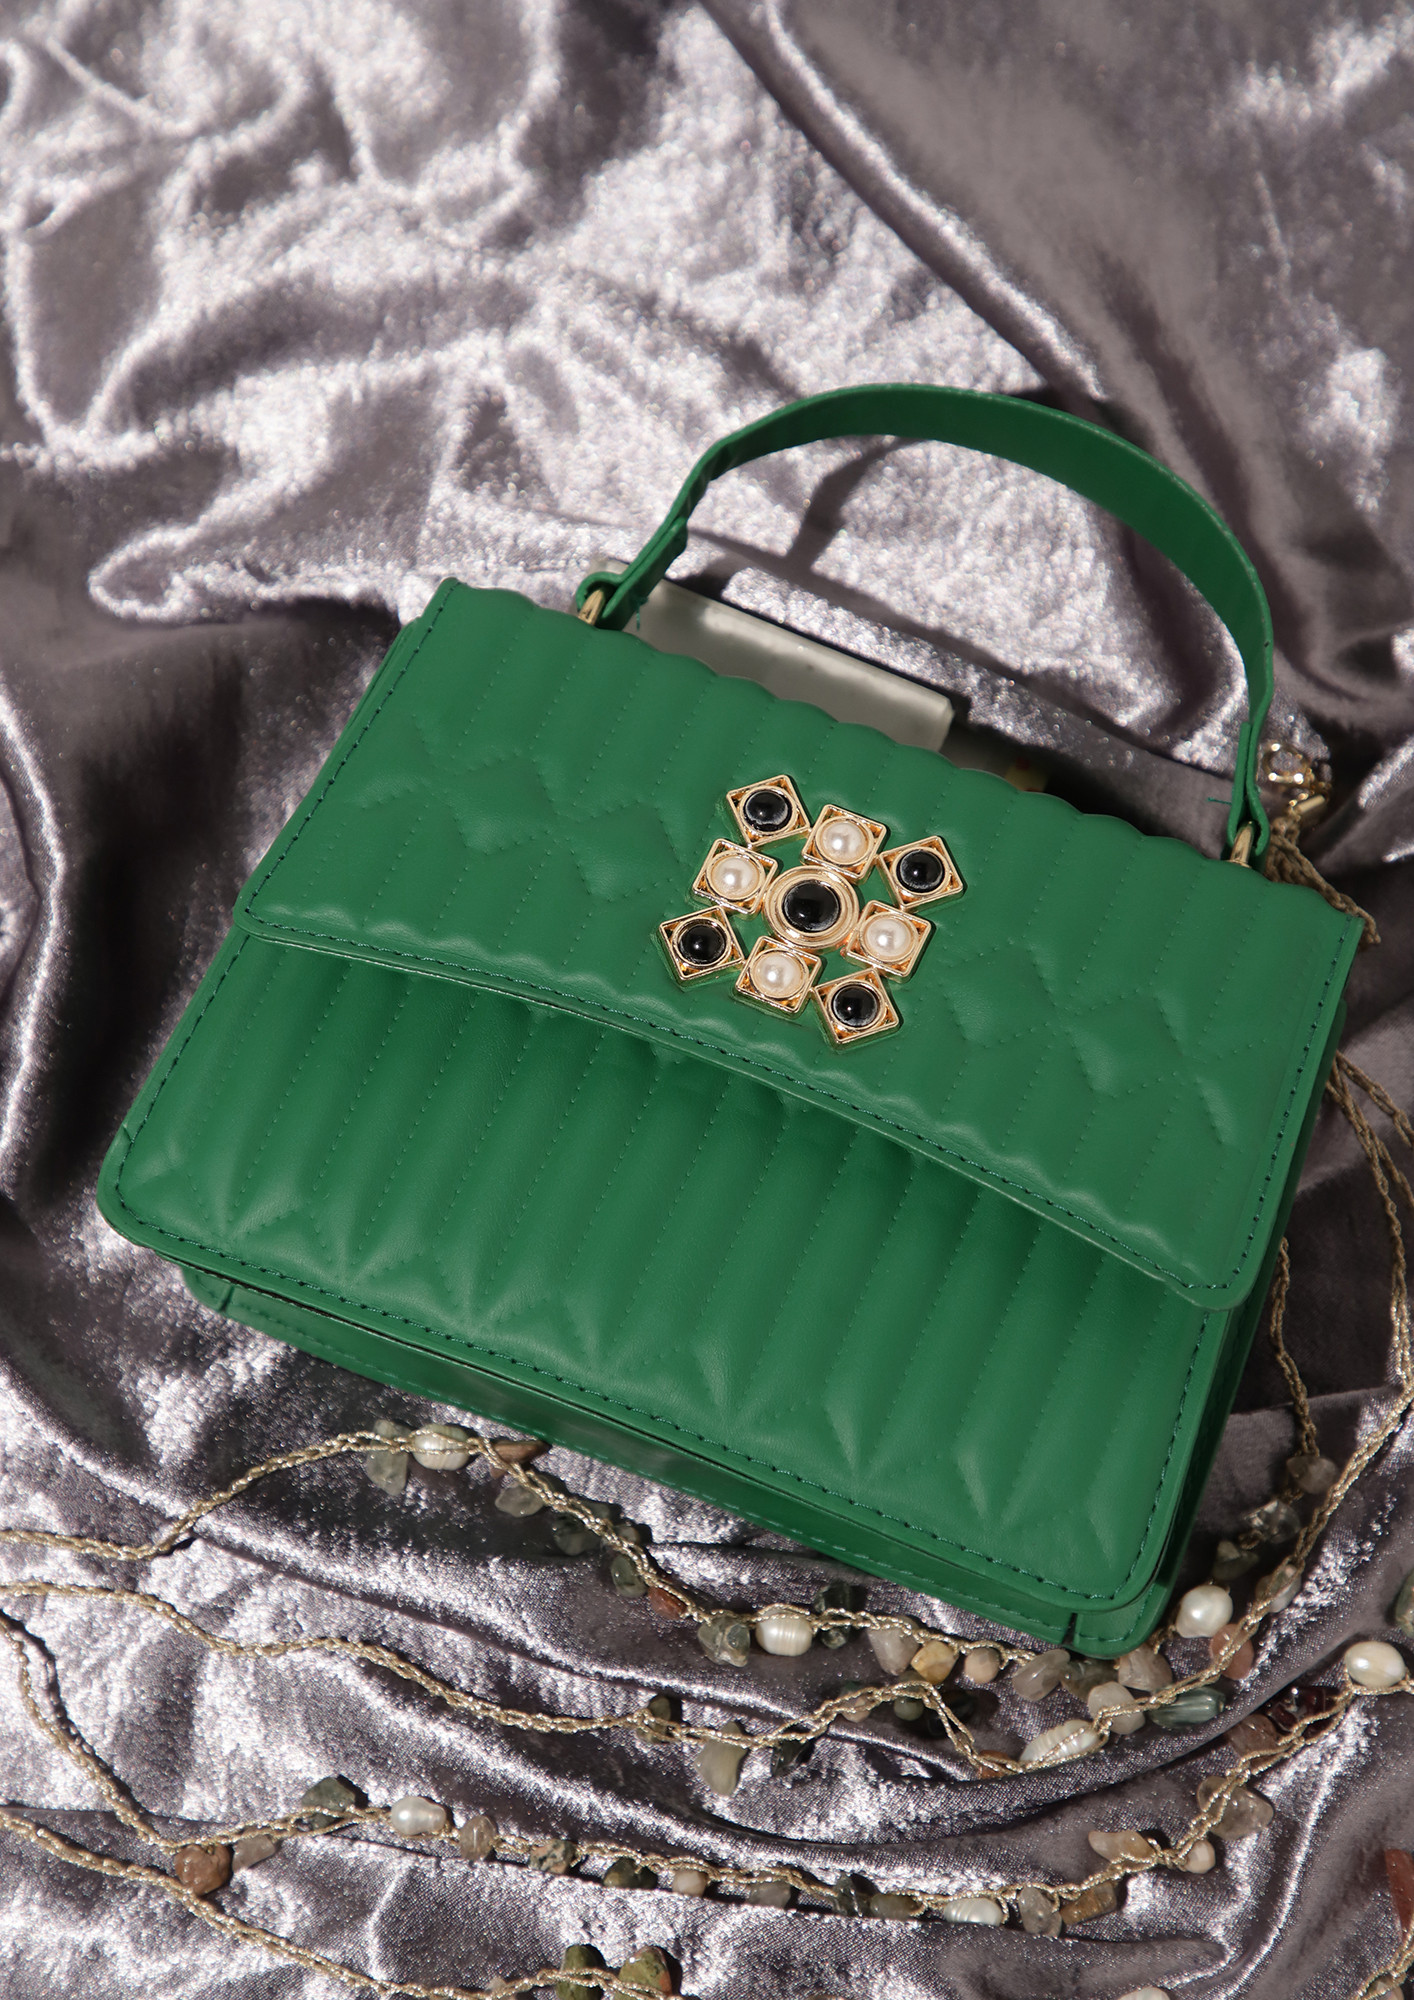 ATTACHED TO YOU GREEN PEARL HANDBAG